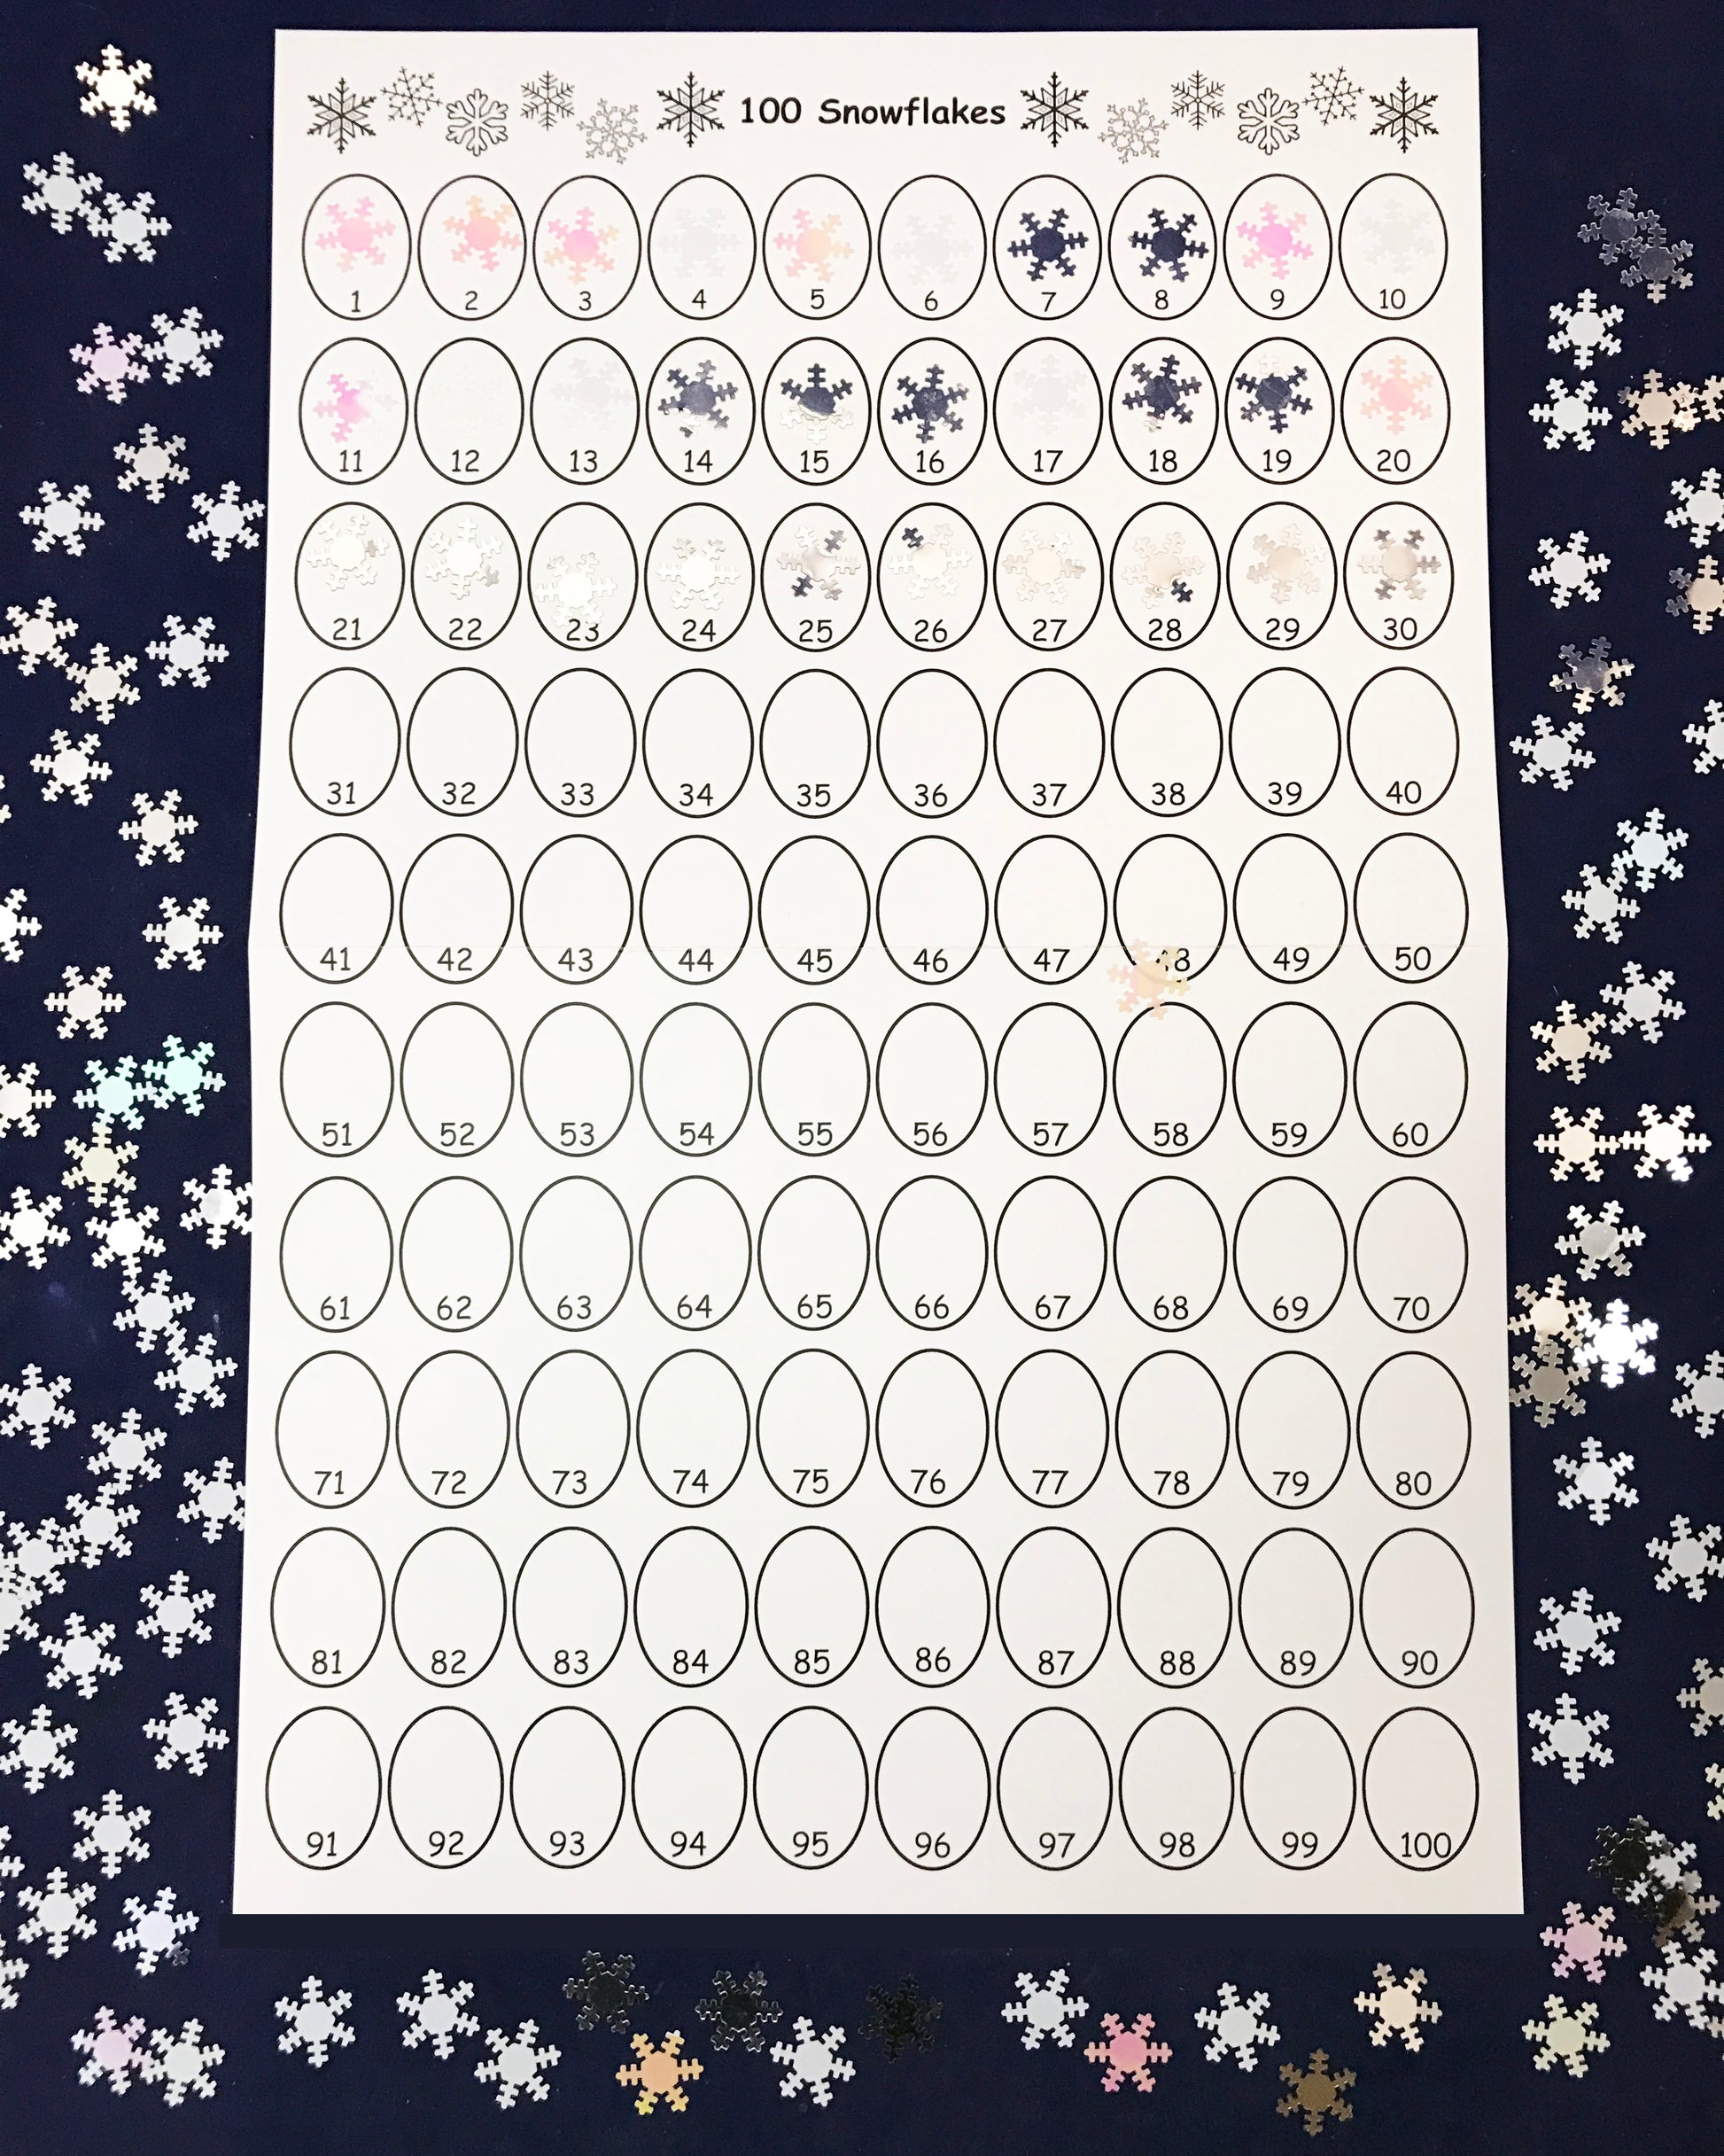 100 Board - Counting to 100 with snowflakes